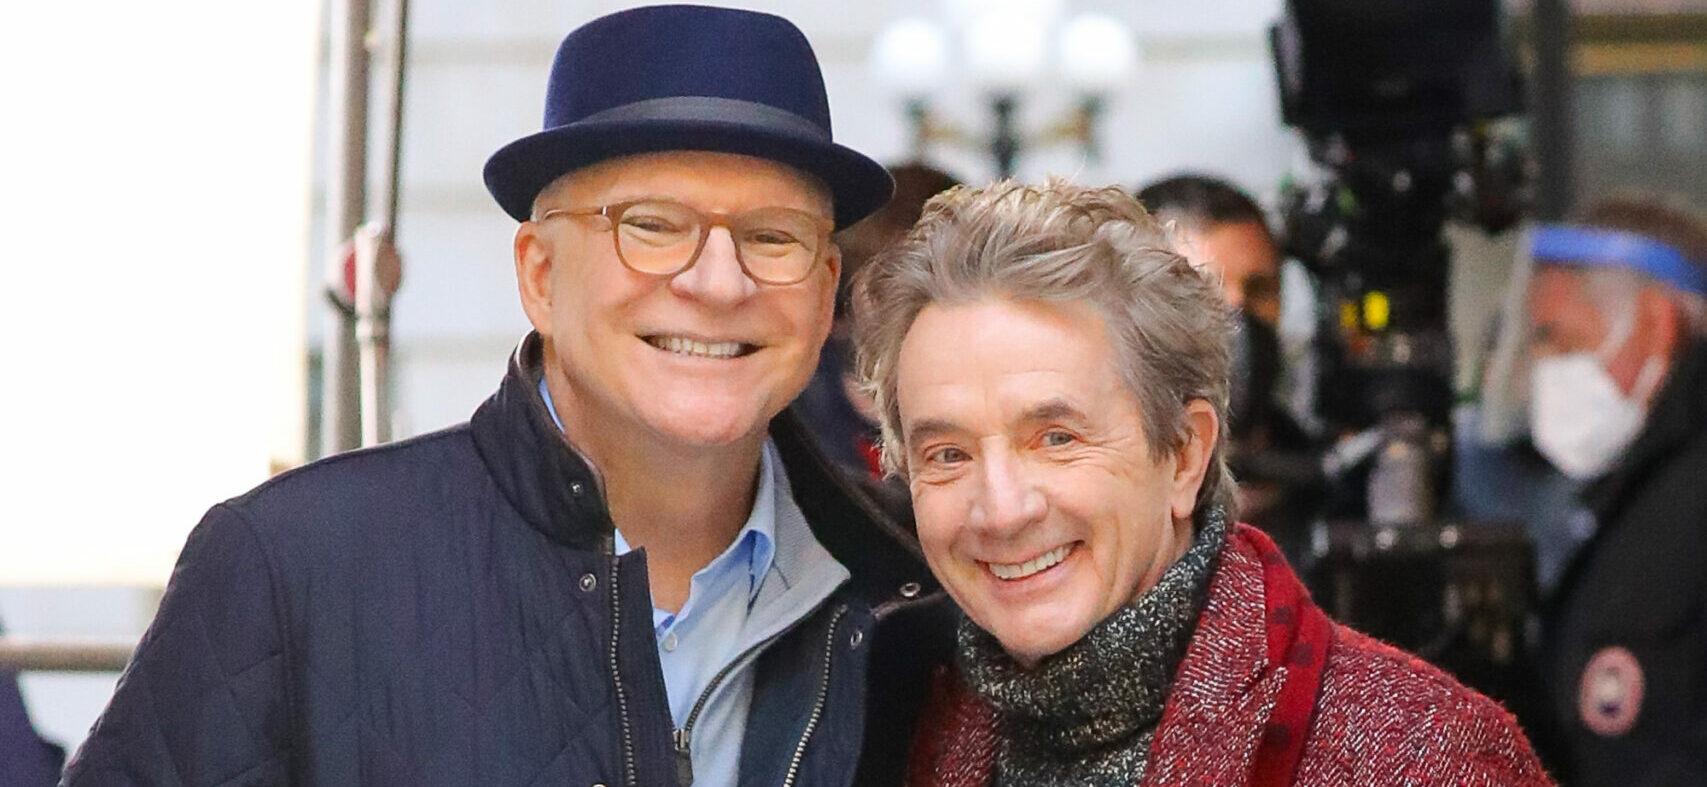 Martin Short and Steve Martin are all smiling while posing for the photographers in NYC on Feb 24, 2021